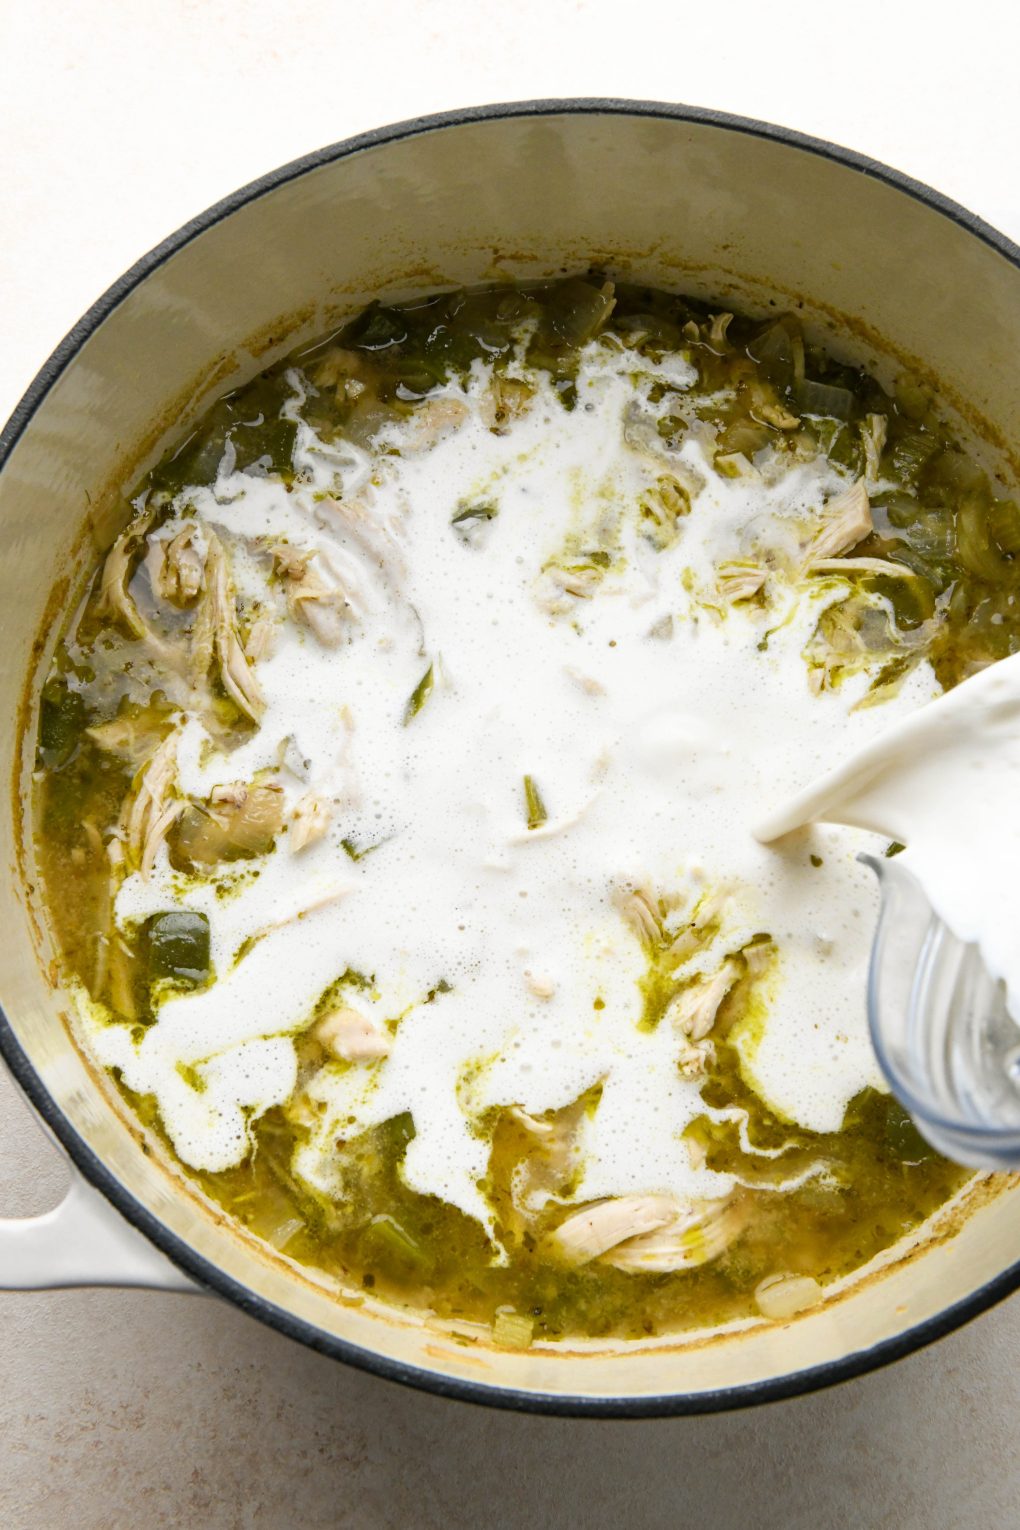 How to make Whole30 White Chicken Chili: Cashew cream being poured into the simmered chili.